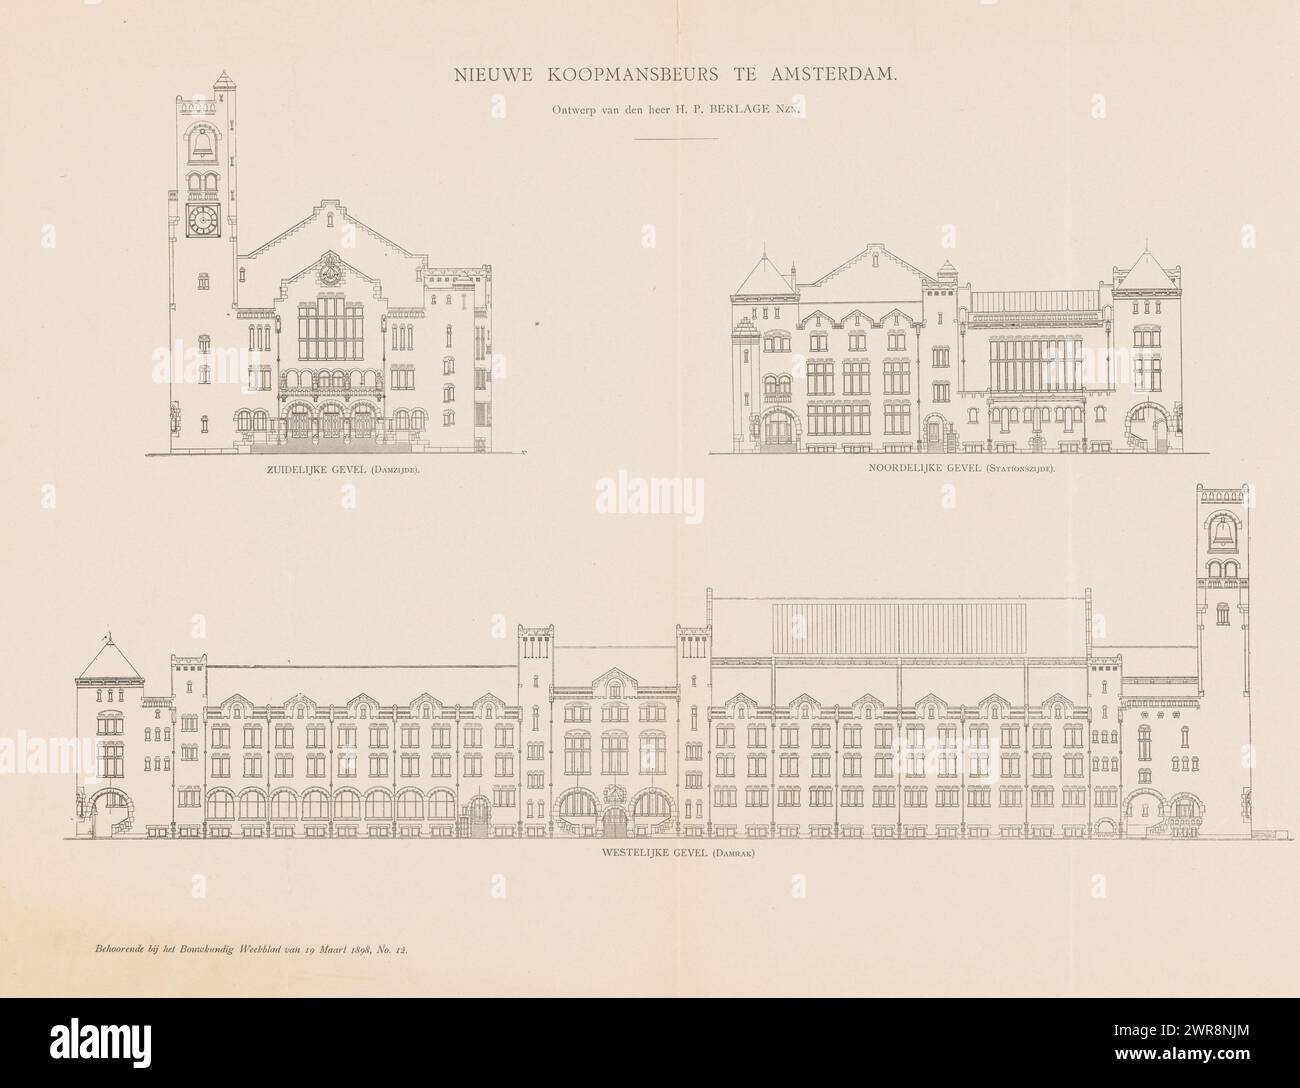 Design for the Beurs van Berlage in Amsterdam, New merchant's exchange in Amsterdam, design by Mr. H.P. Berlage Nzn. (title on object), maker: anonymous, publisher: Mouton & Co., printer: Roeloffzen & Hübner, The Hague, 1898, paper, photolithography, height 350 mm × width 501 mm, photomechanical print Stock Photo